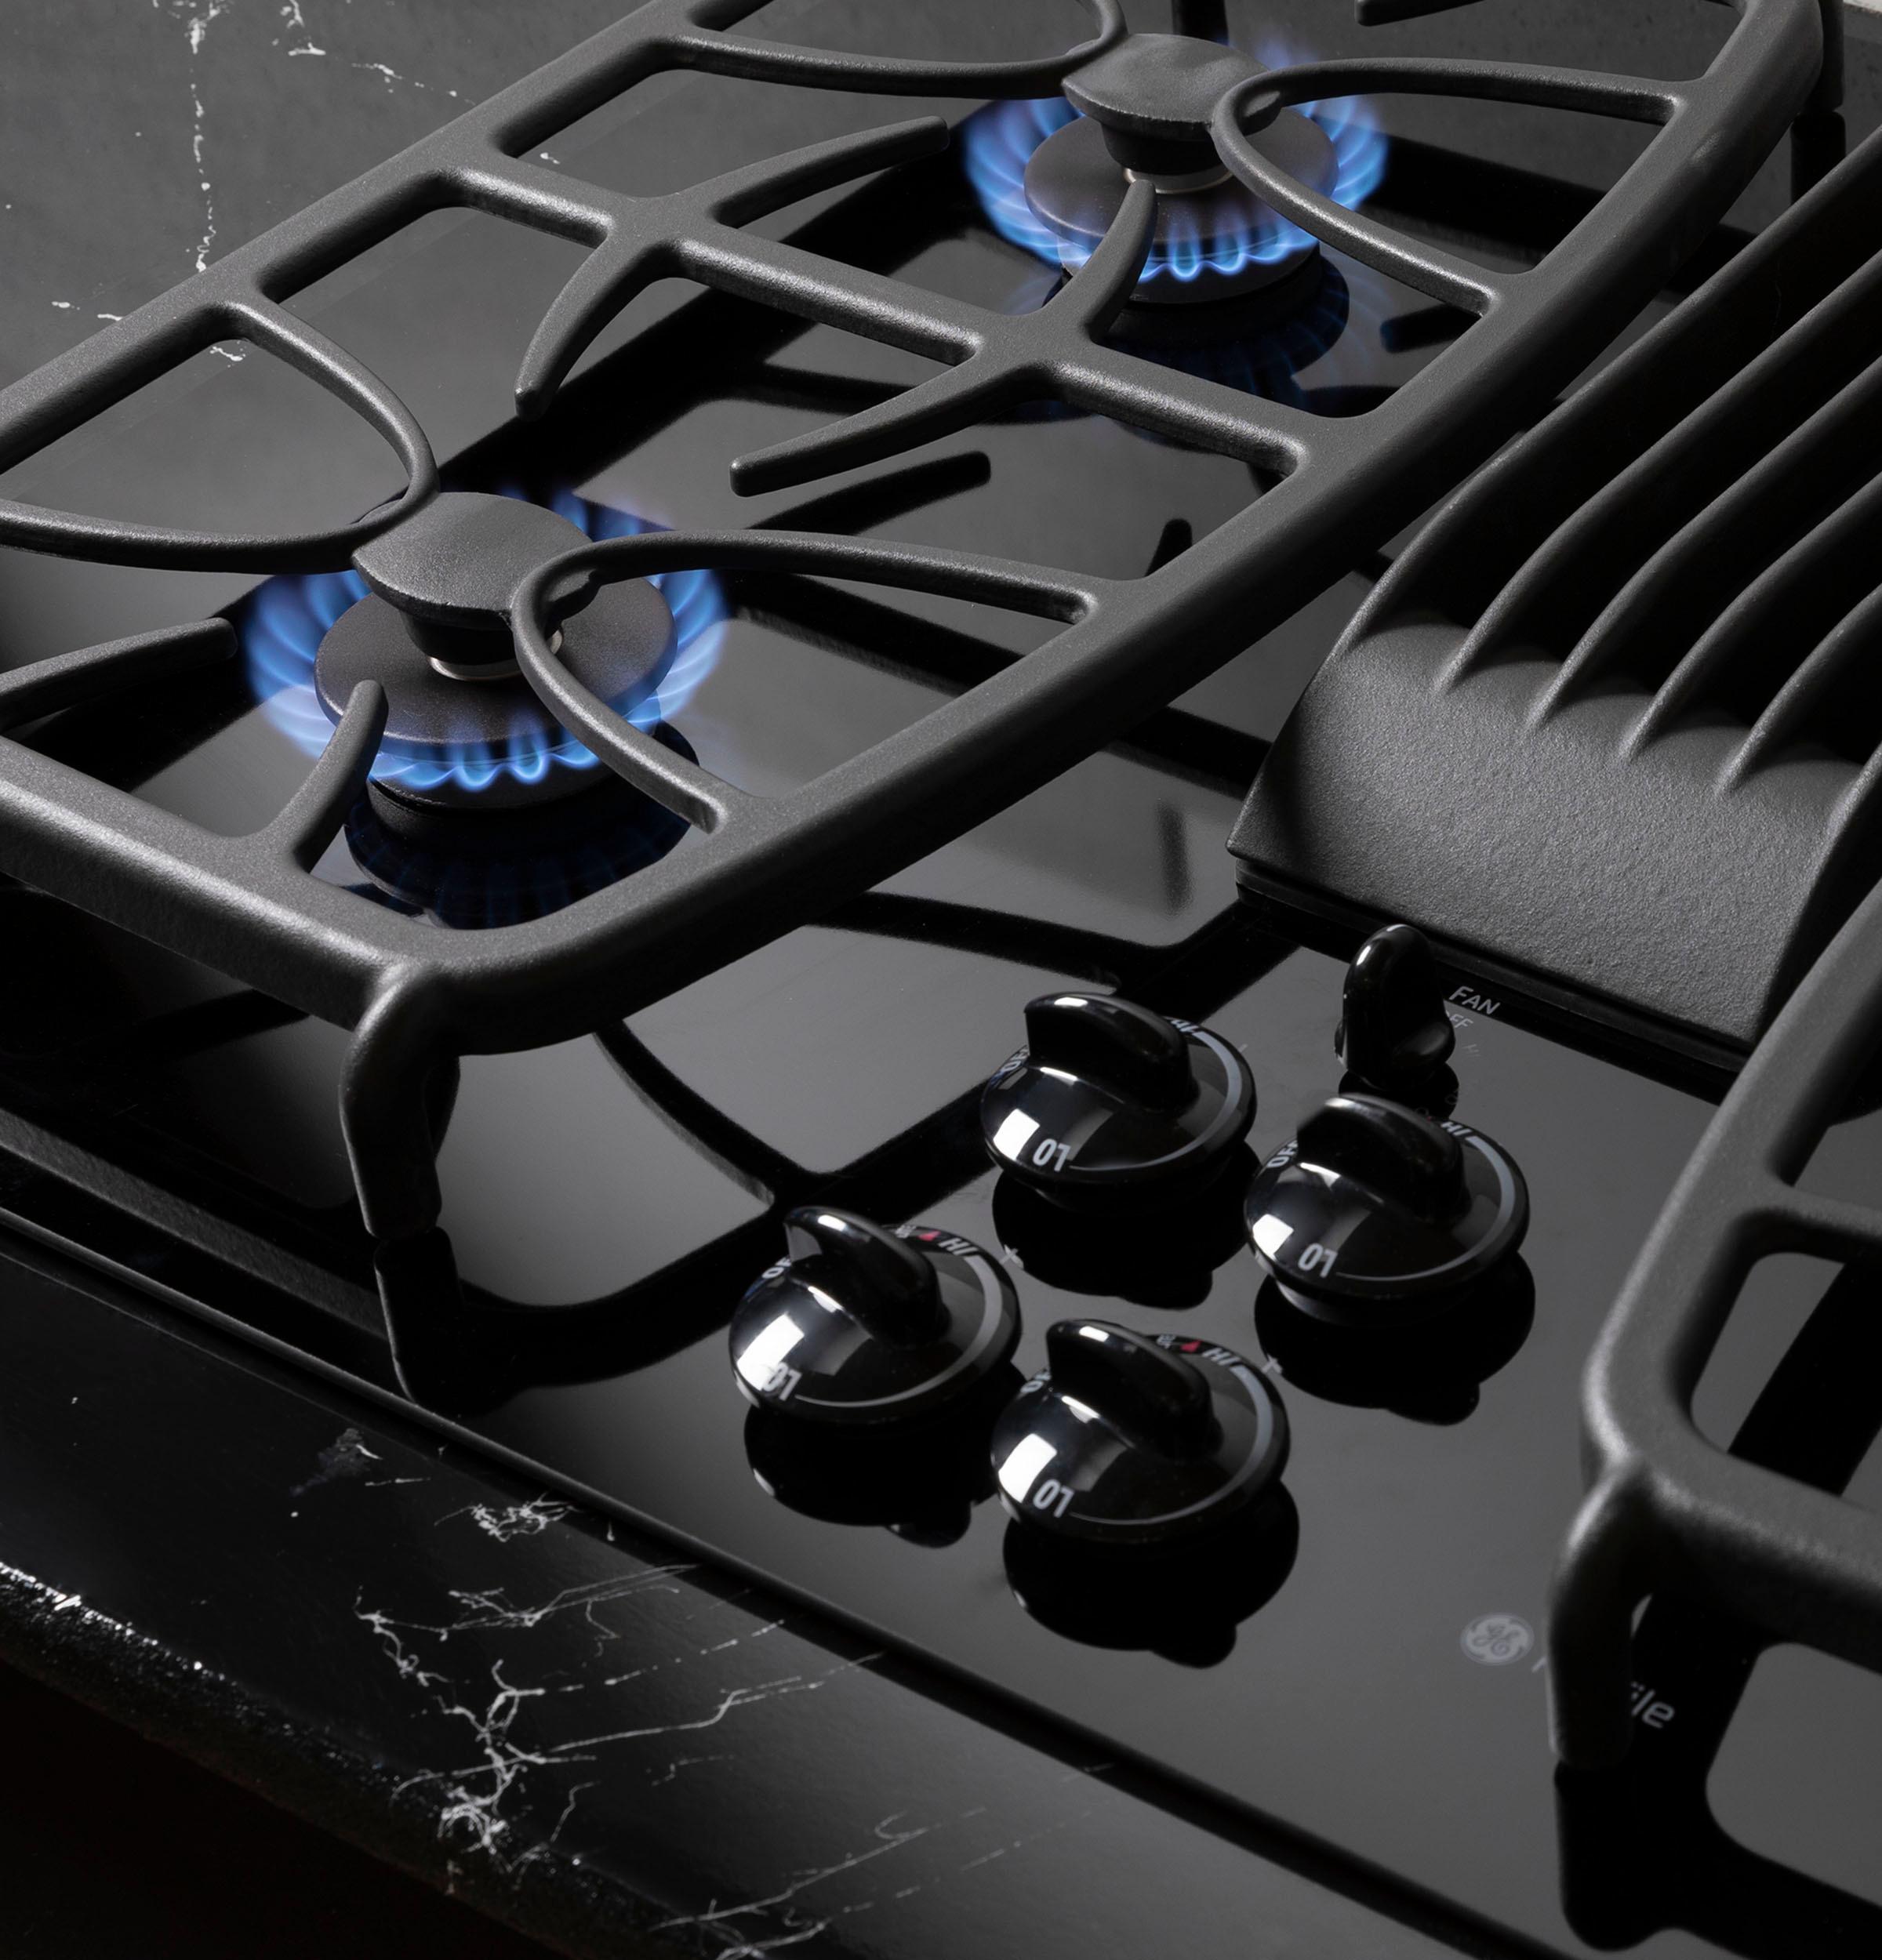 GE Profile 30 Built-In Downdraft Electric Cooktop with 4 Burners